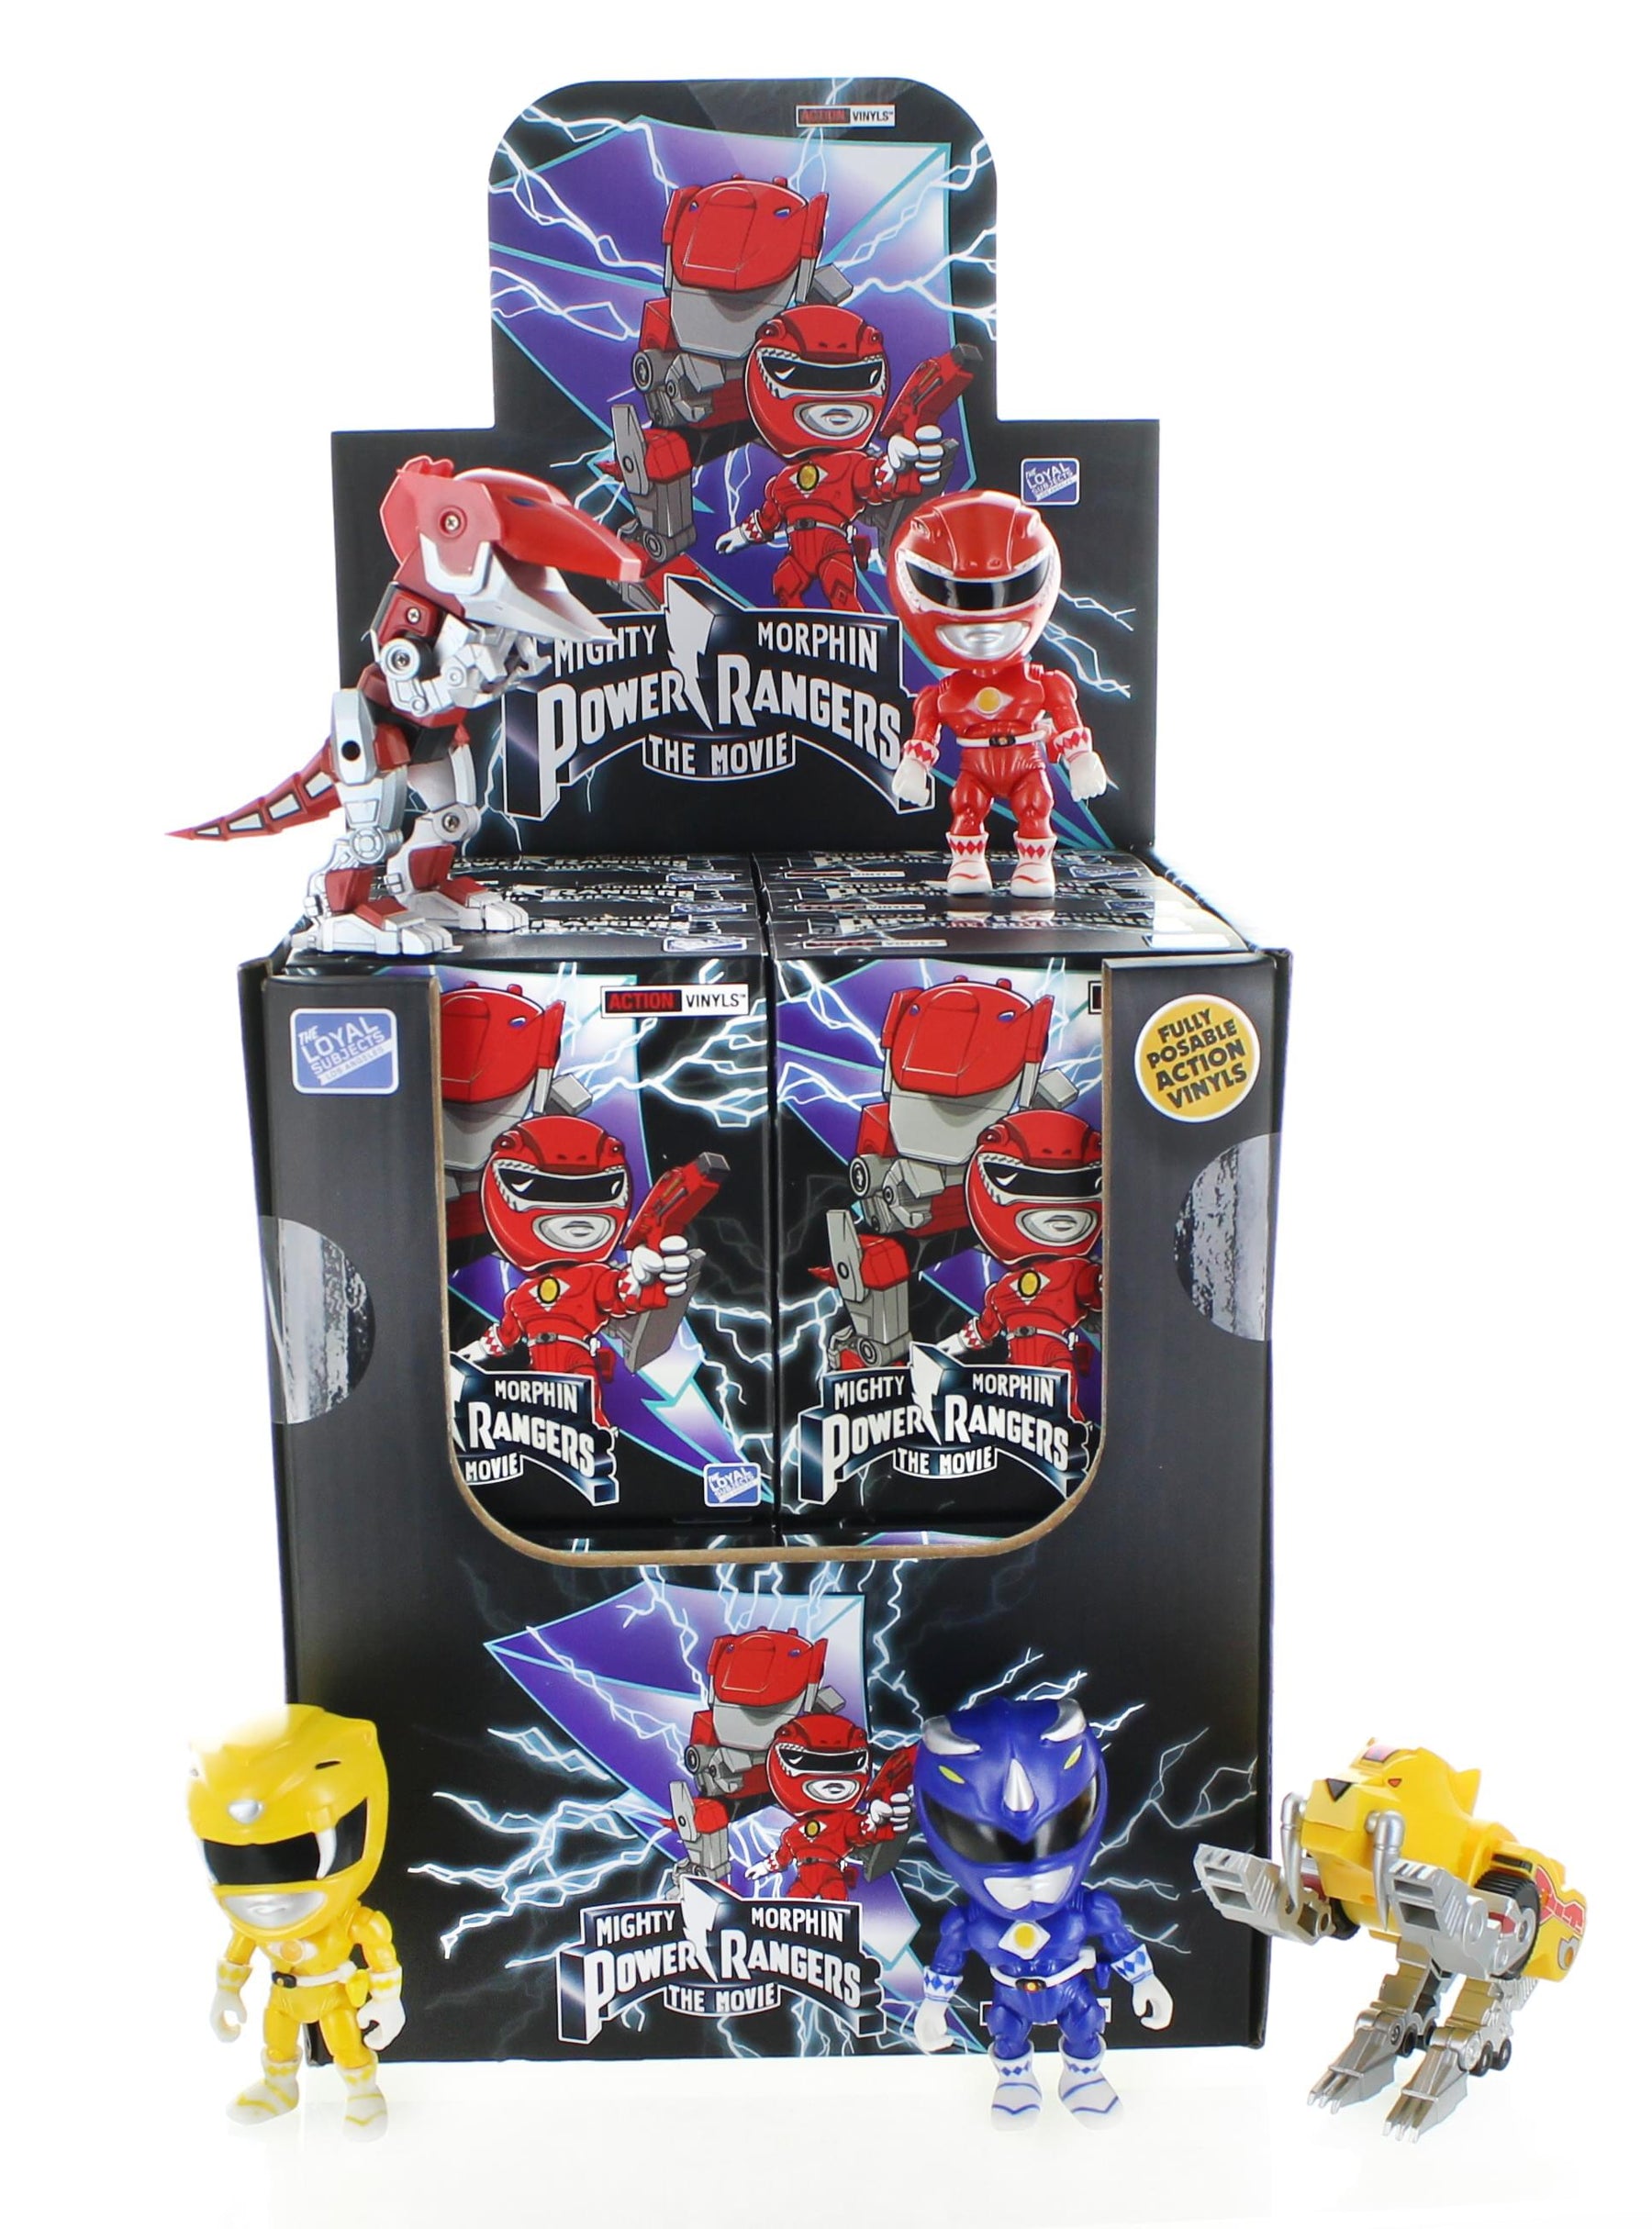 The Loyal Subjects Mighty Morphin Power Rangers Blind Box Vinyl Figures | Wave 2